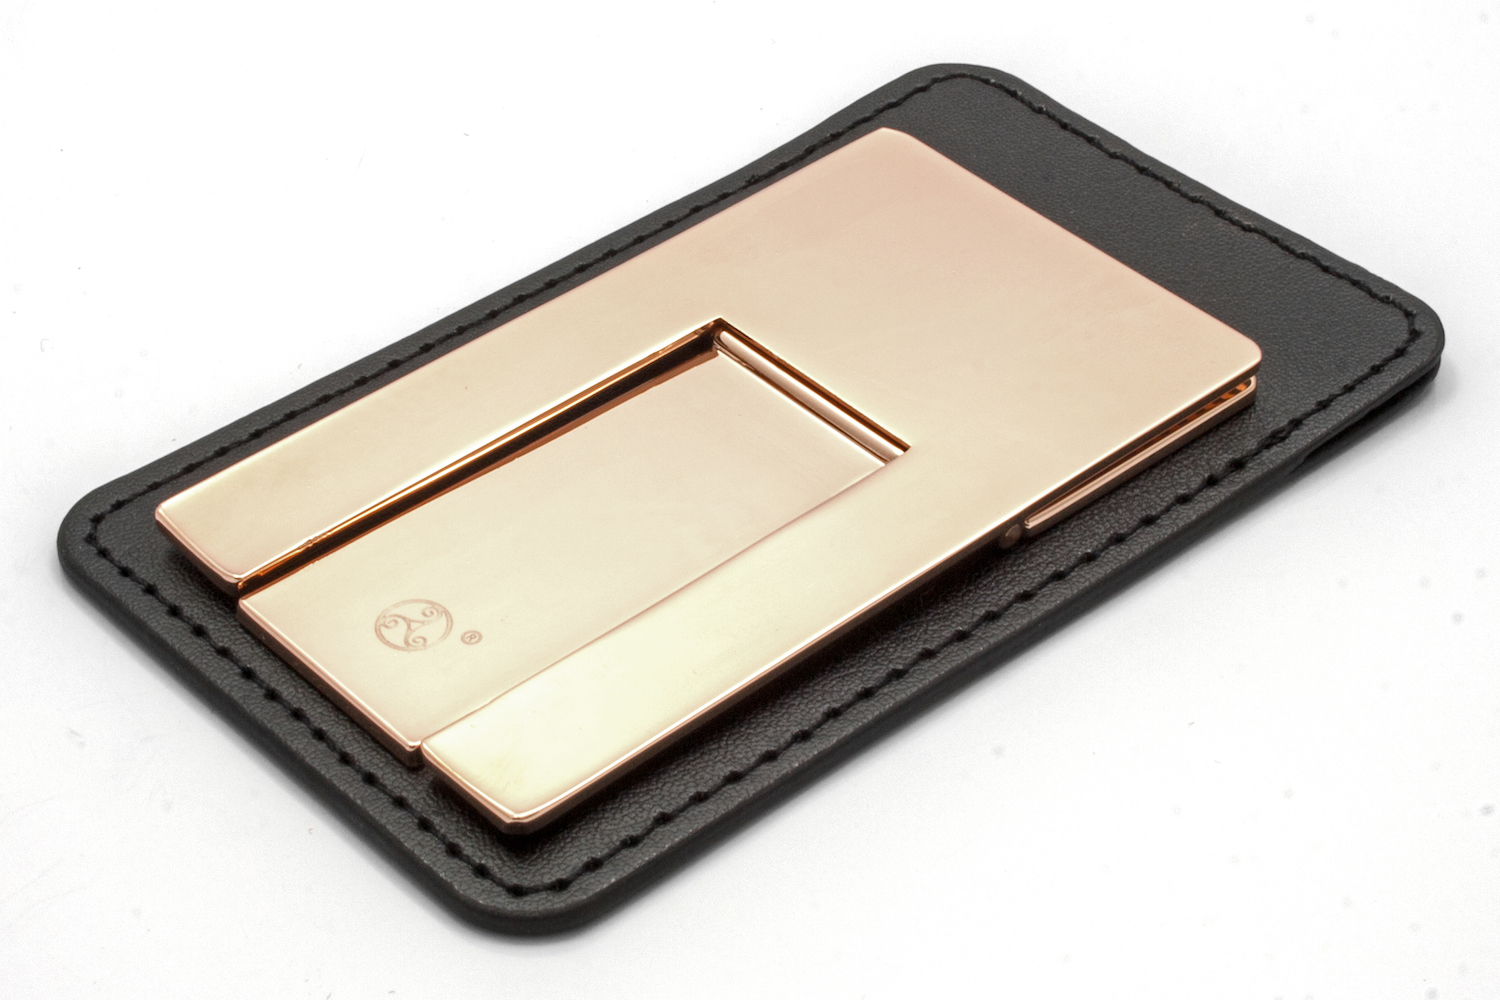 Rattray's The X Rose Gold Cigarstand (3x)